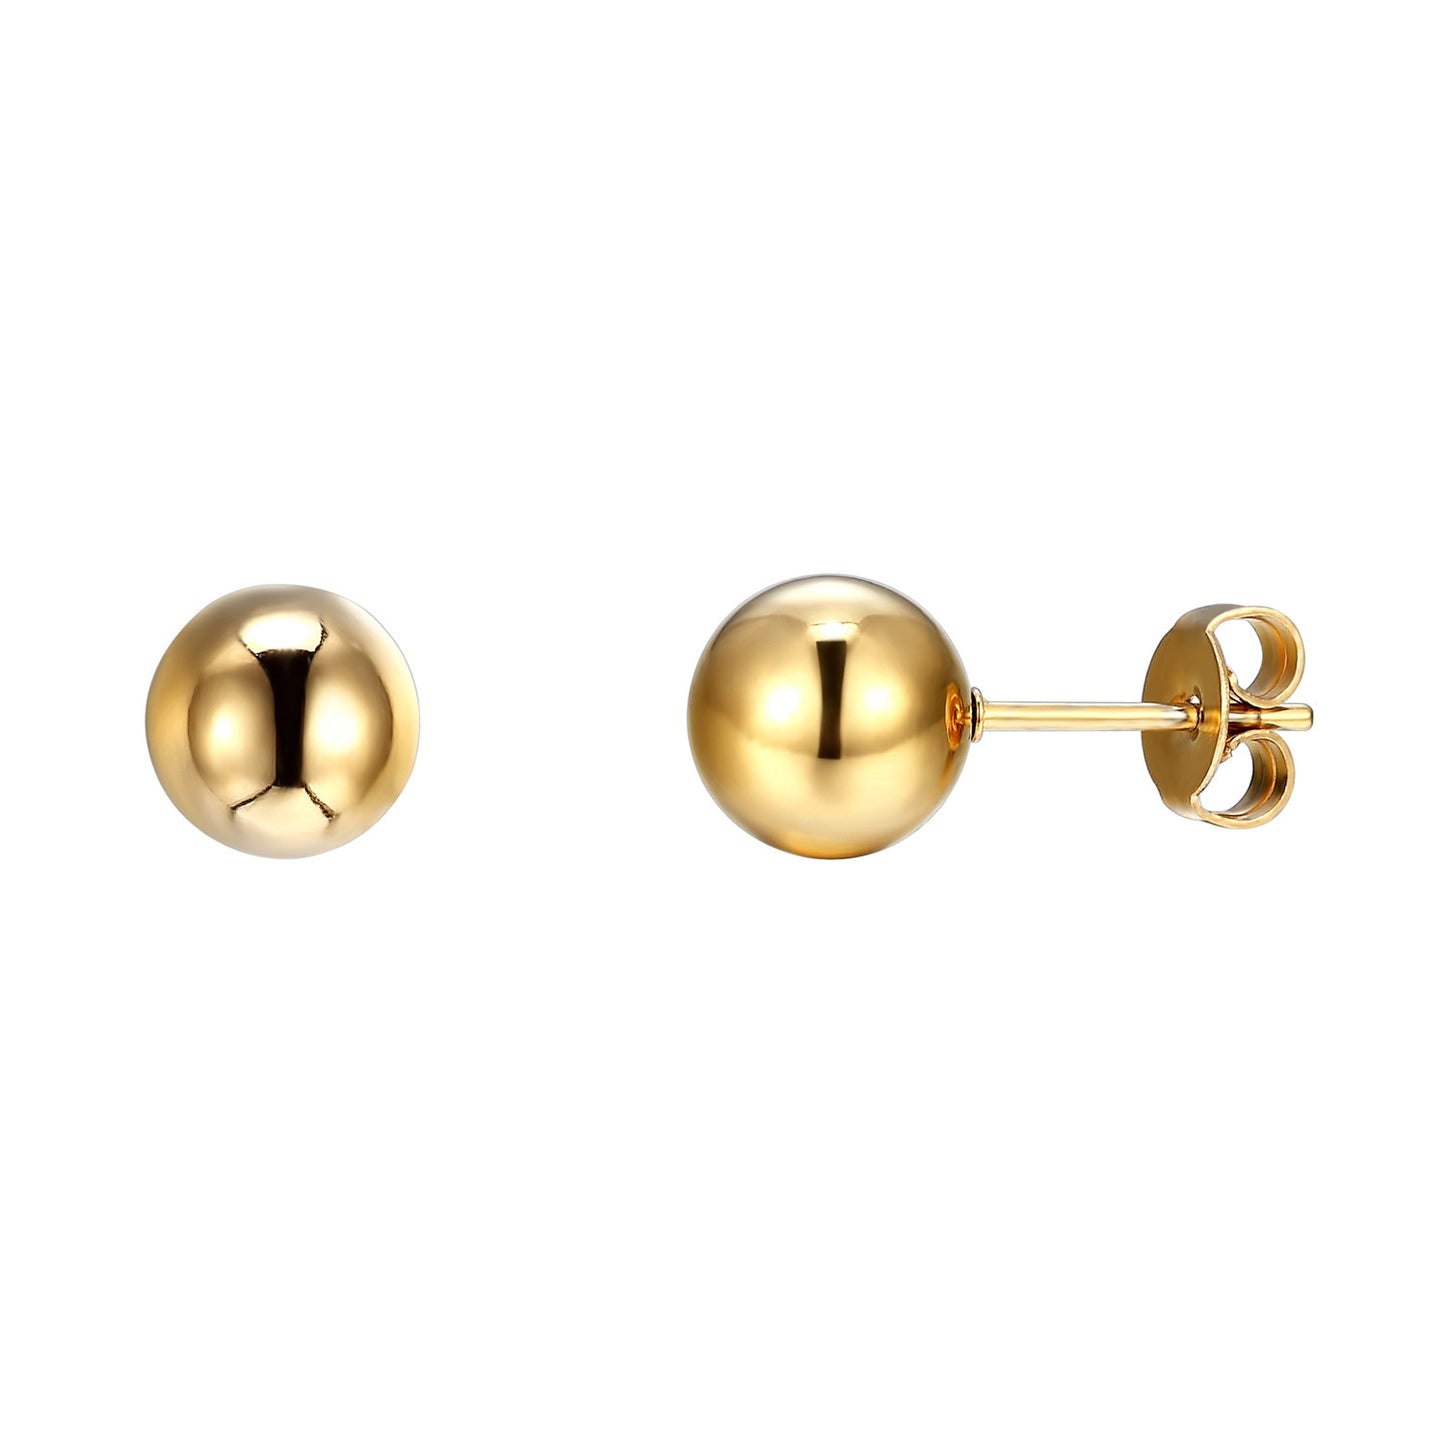 Gold Tone Bead Ball Earrings Clearance On Sale Stainless Steel Mens Ladies Studs